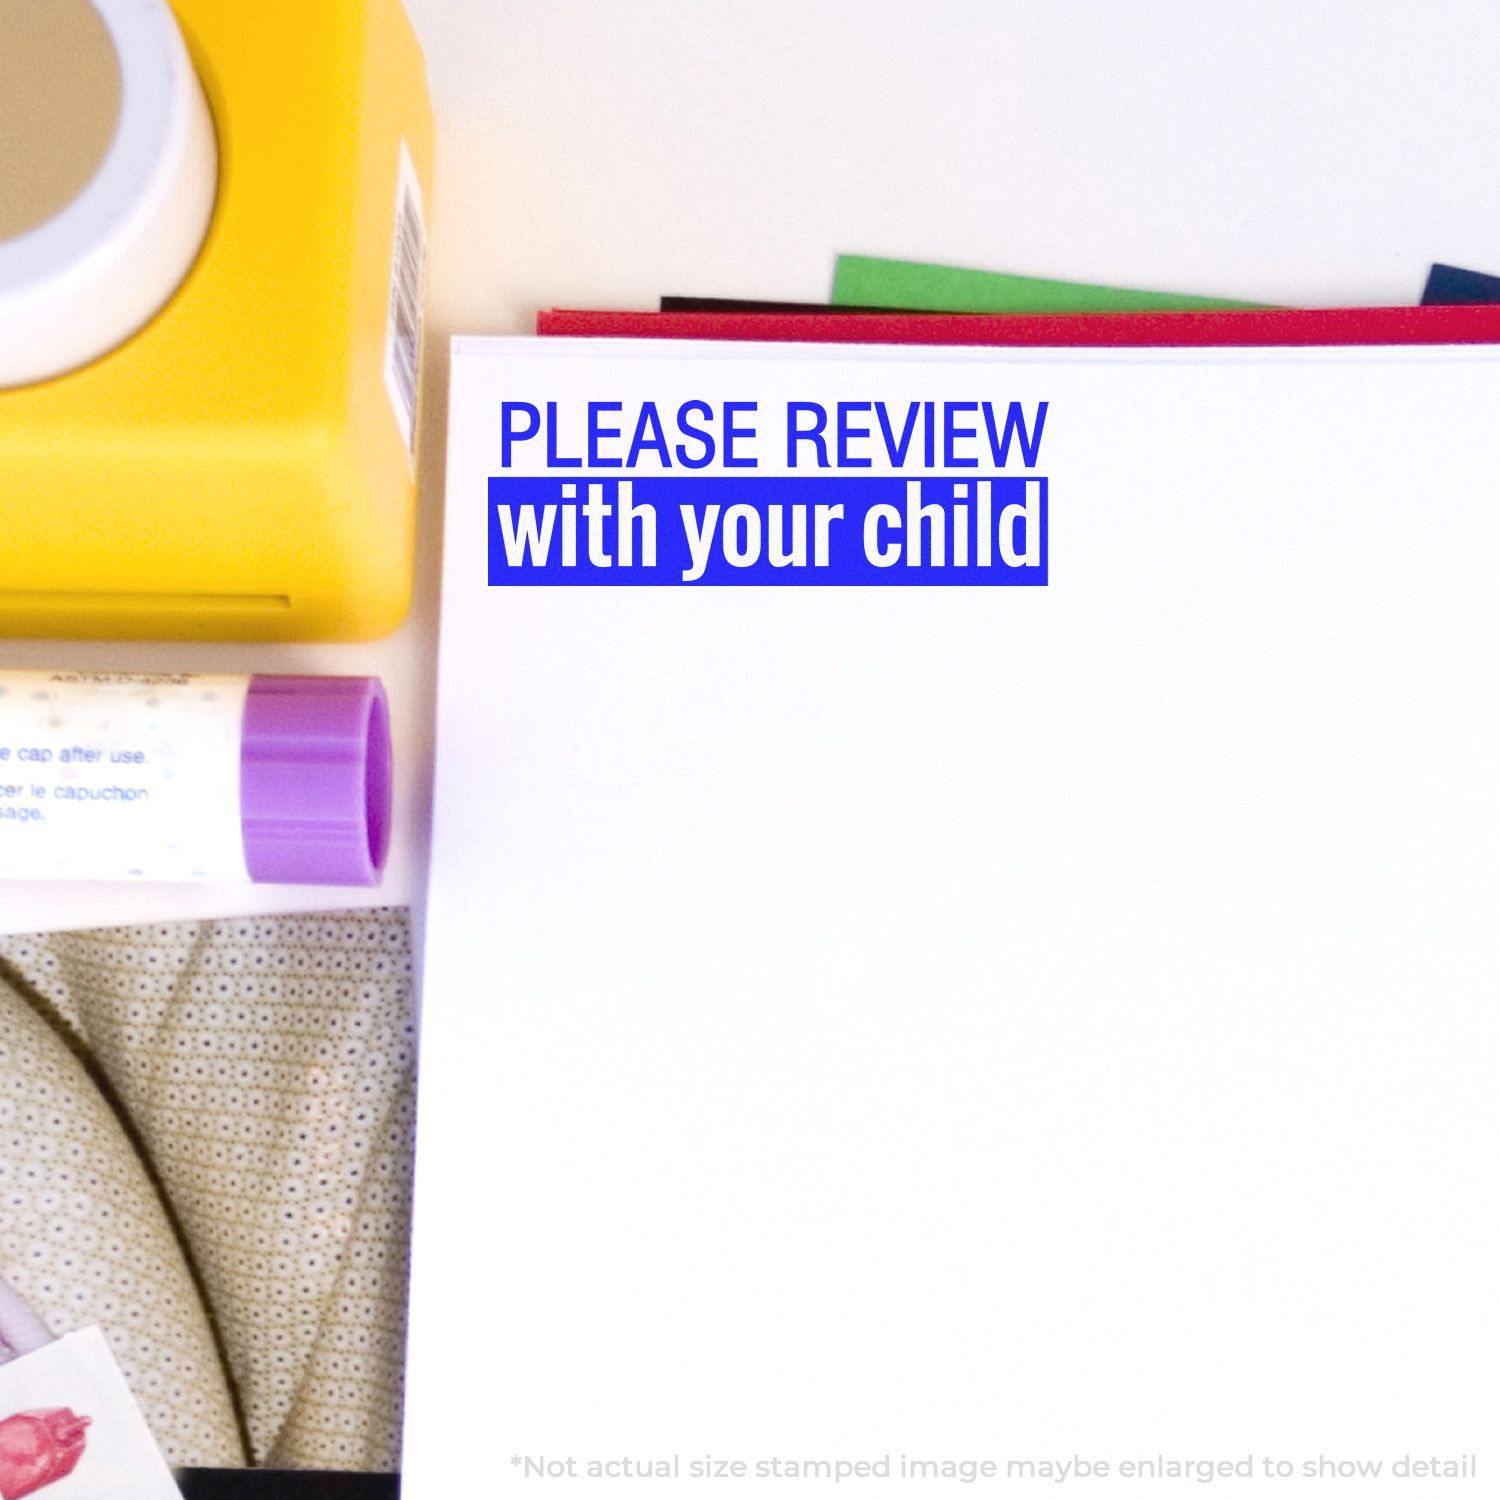 A stock office rubber stamp with a stamped image showing how the text "PLEASE REVIEW with your child" in a bold font and dual-colored marking is displayed after stamping.